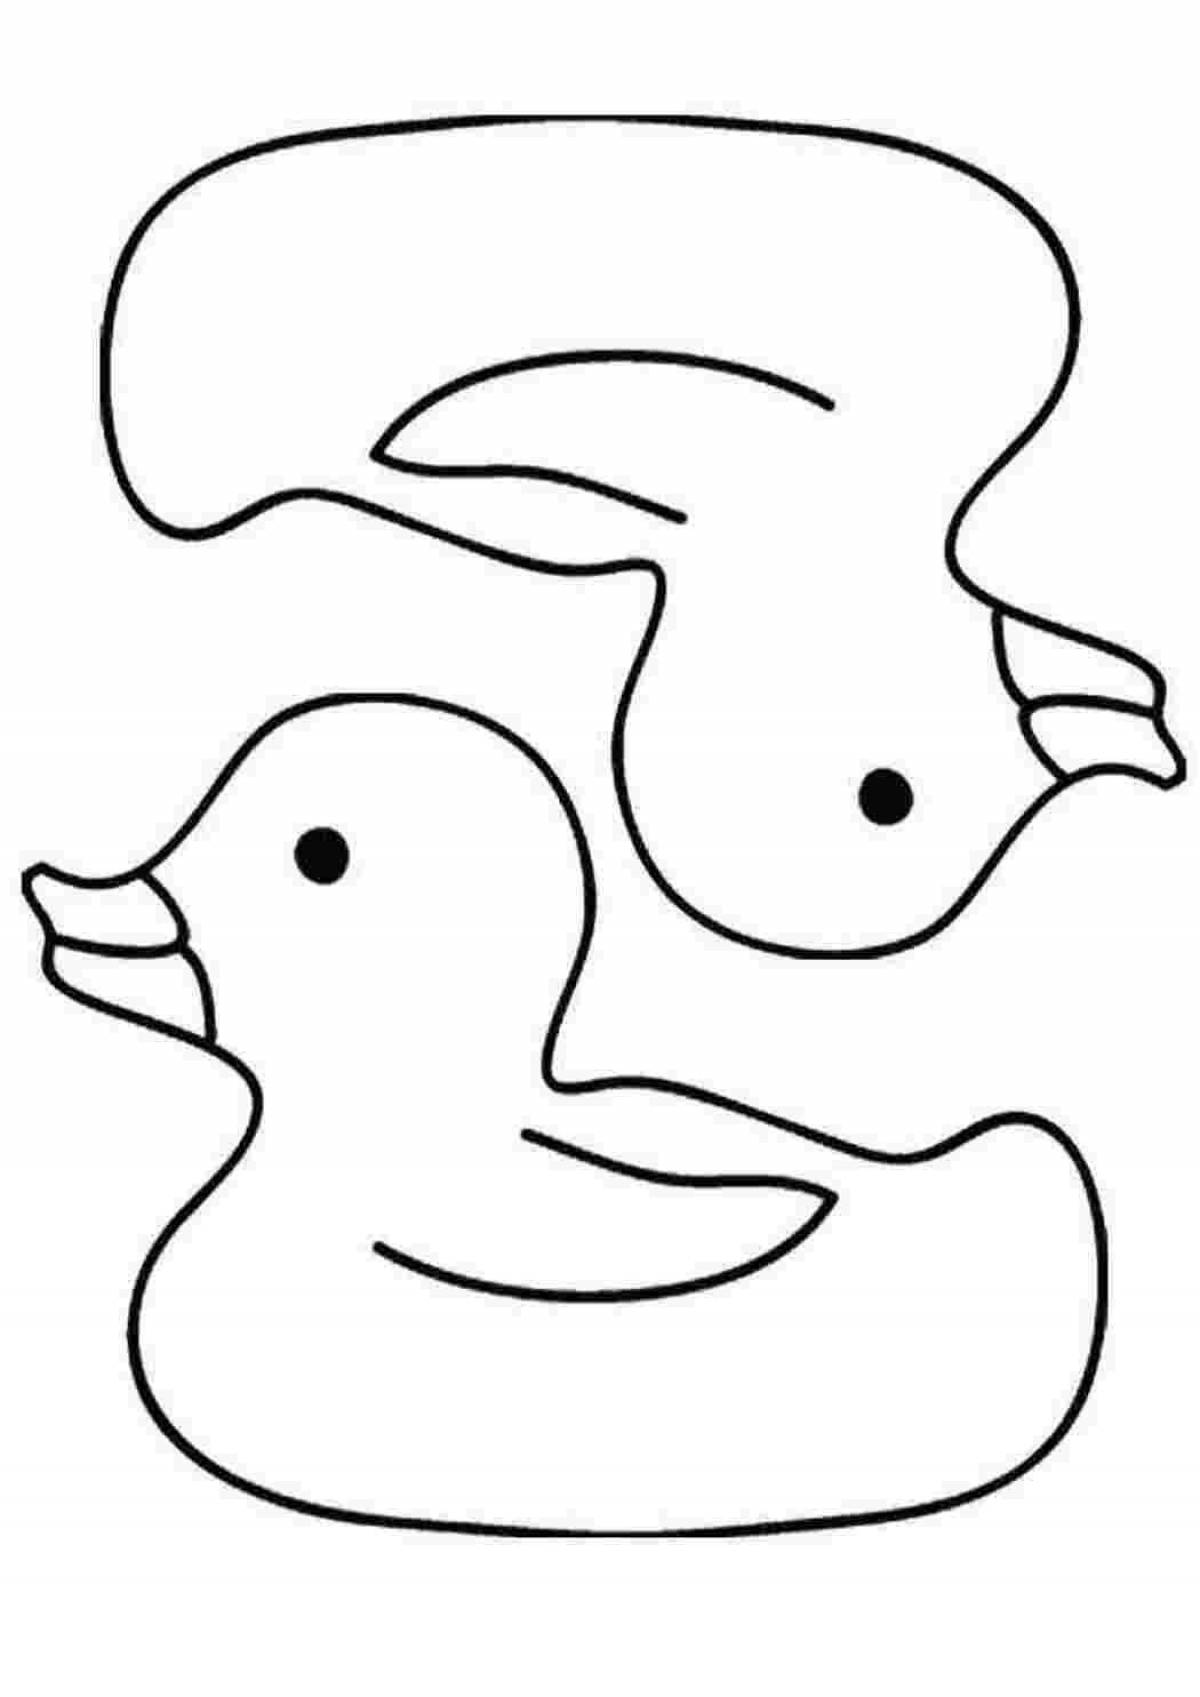 Playful Dymkovo duck toy coloring book for kids